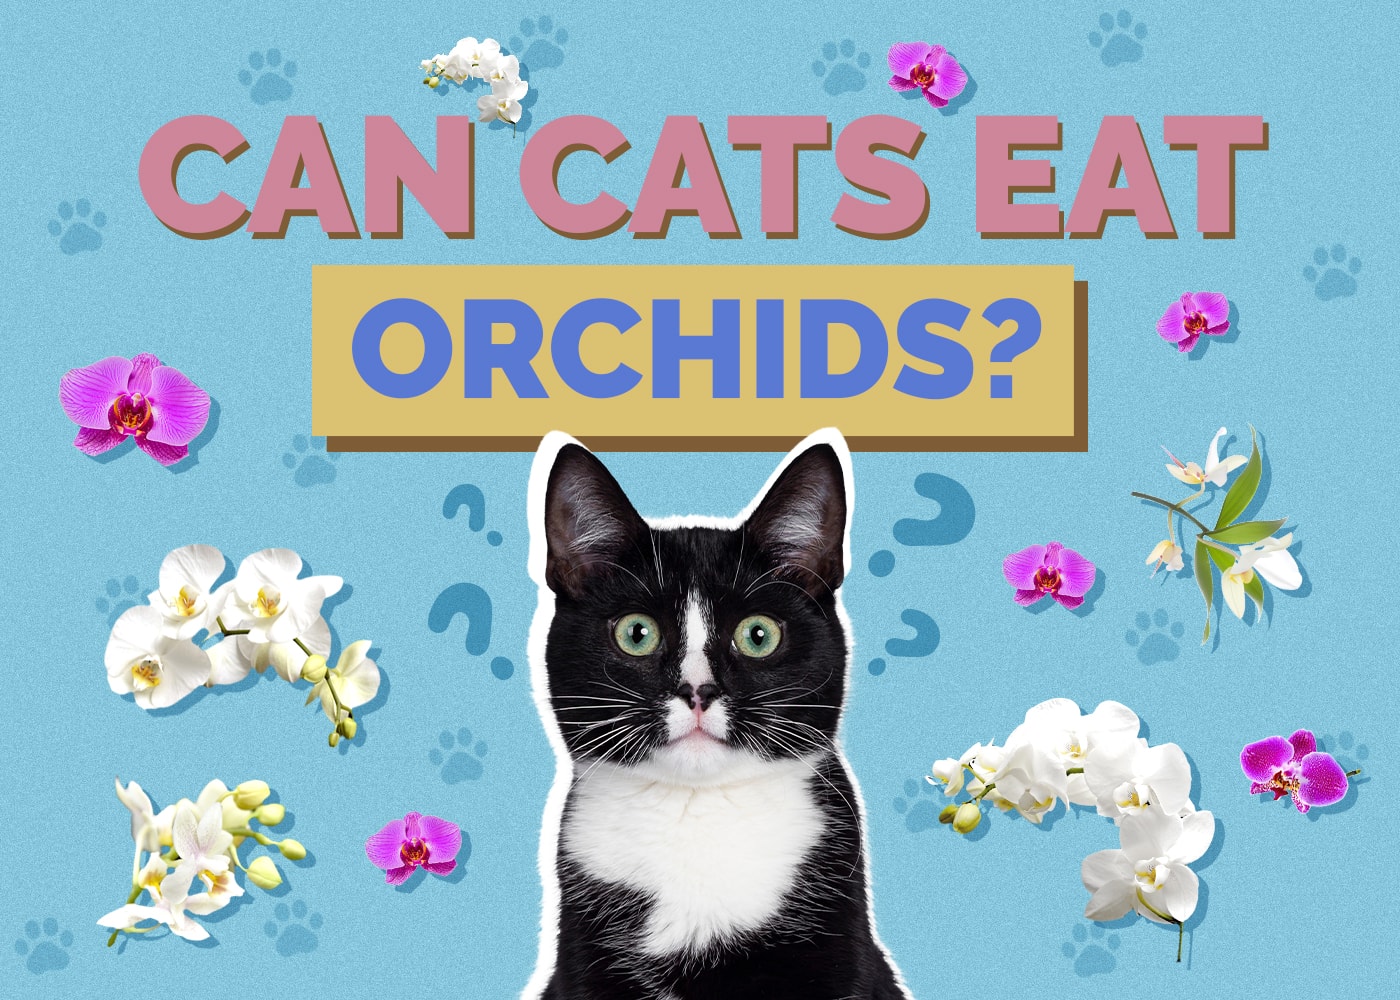 Can Cats Eat orchids